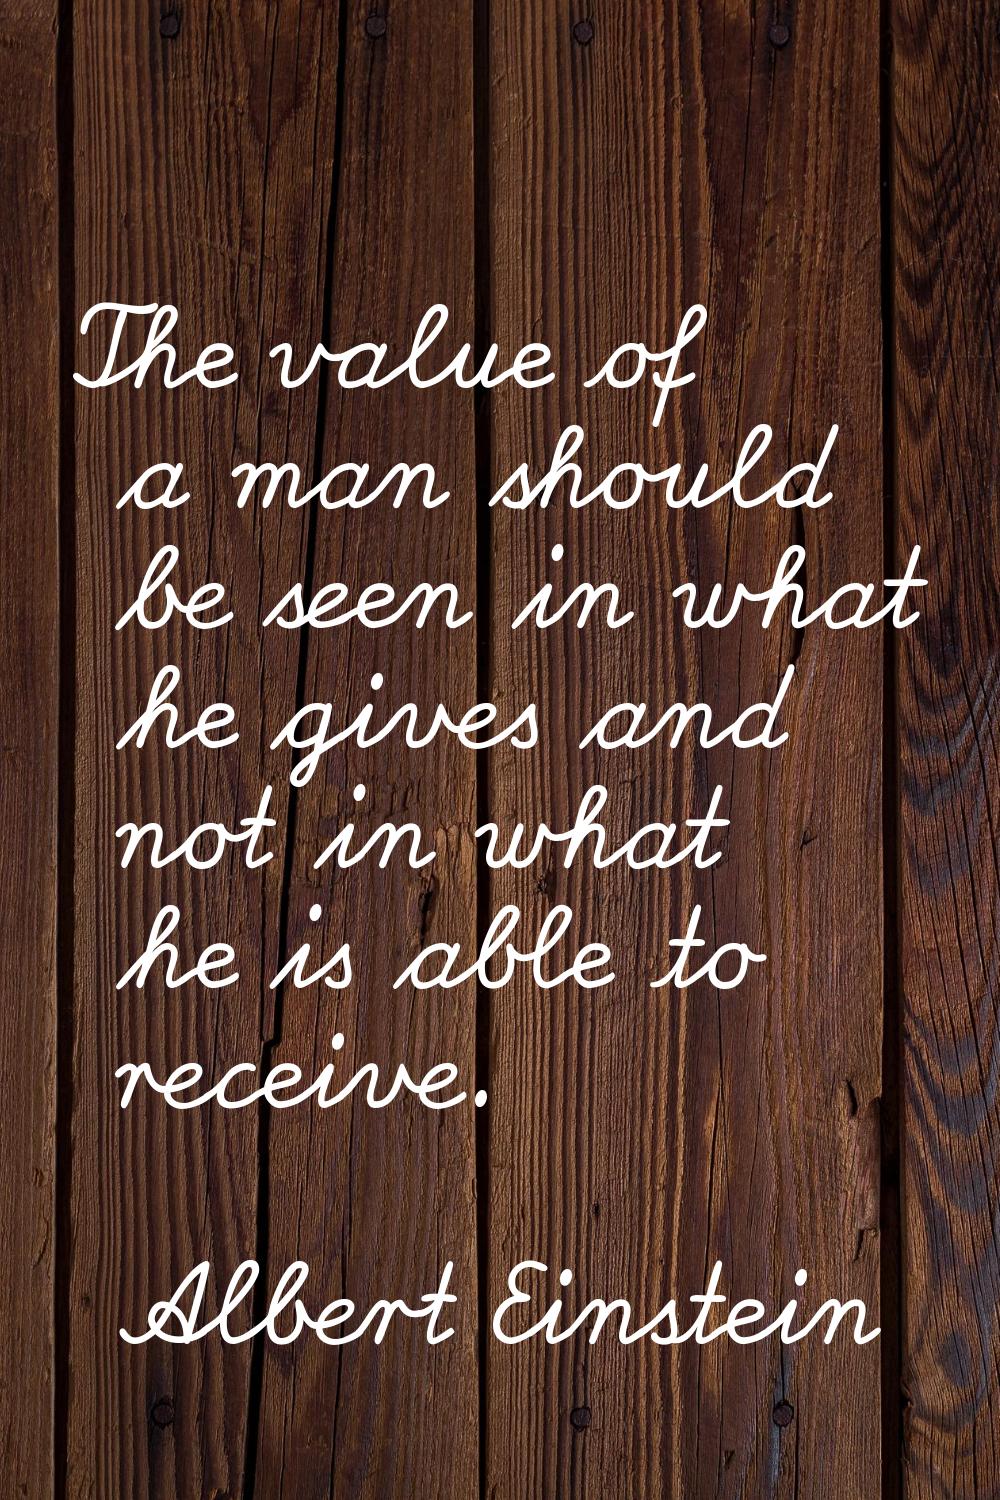 The value of a man should be seen in what he gives and not in what he is able to receive.